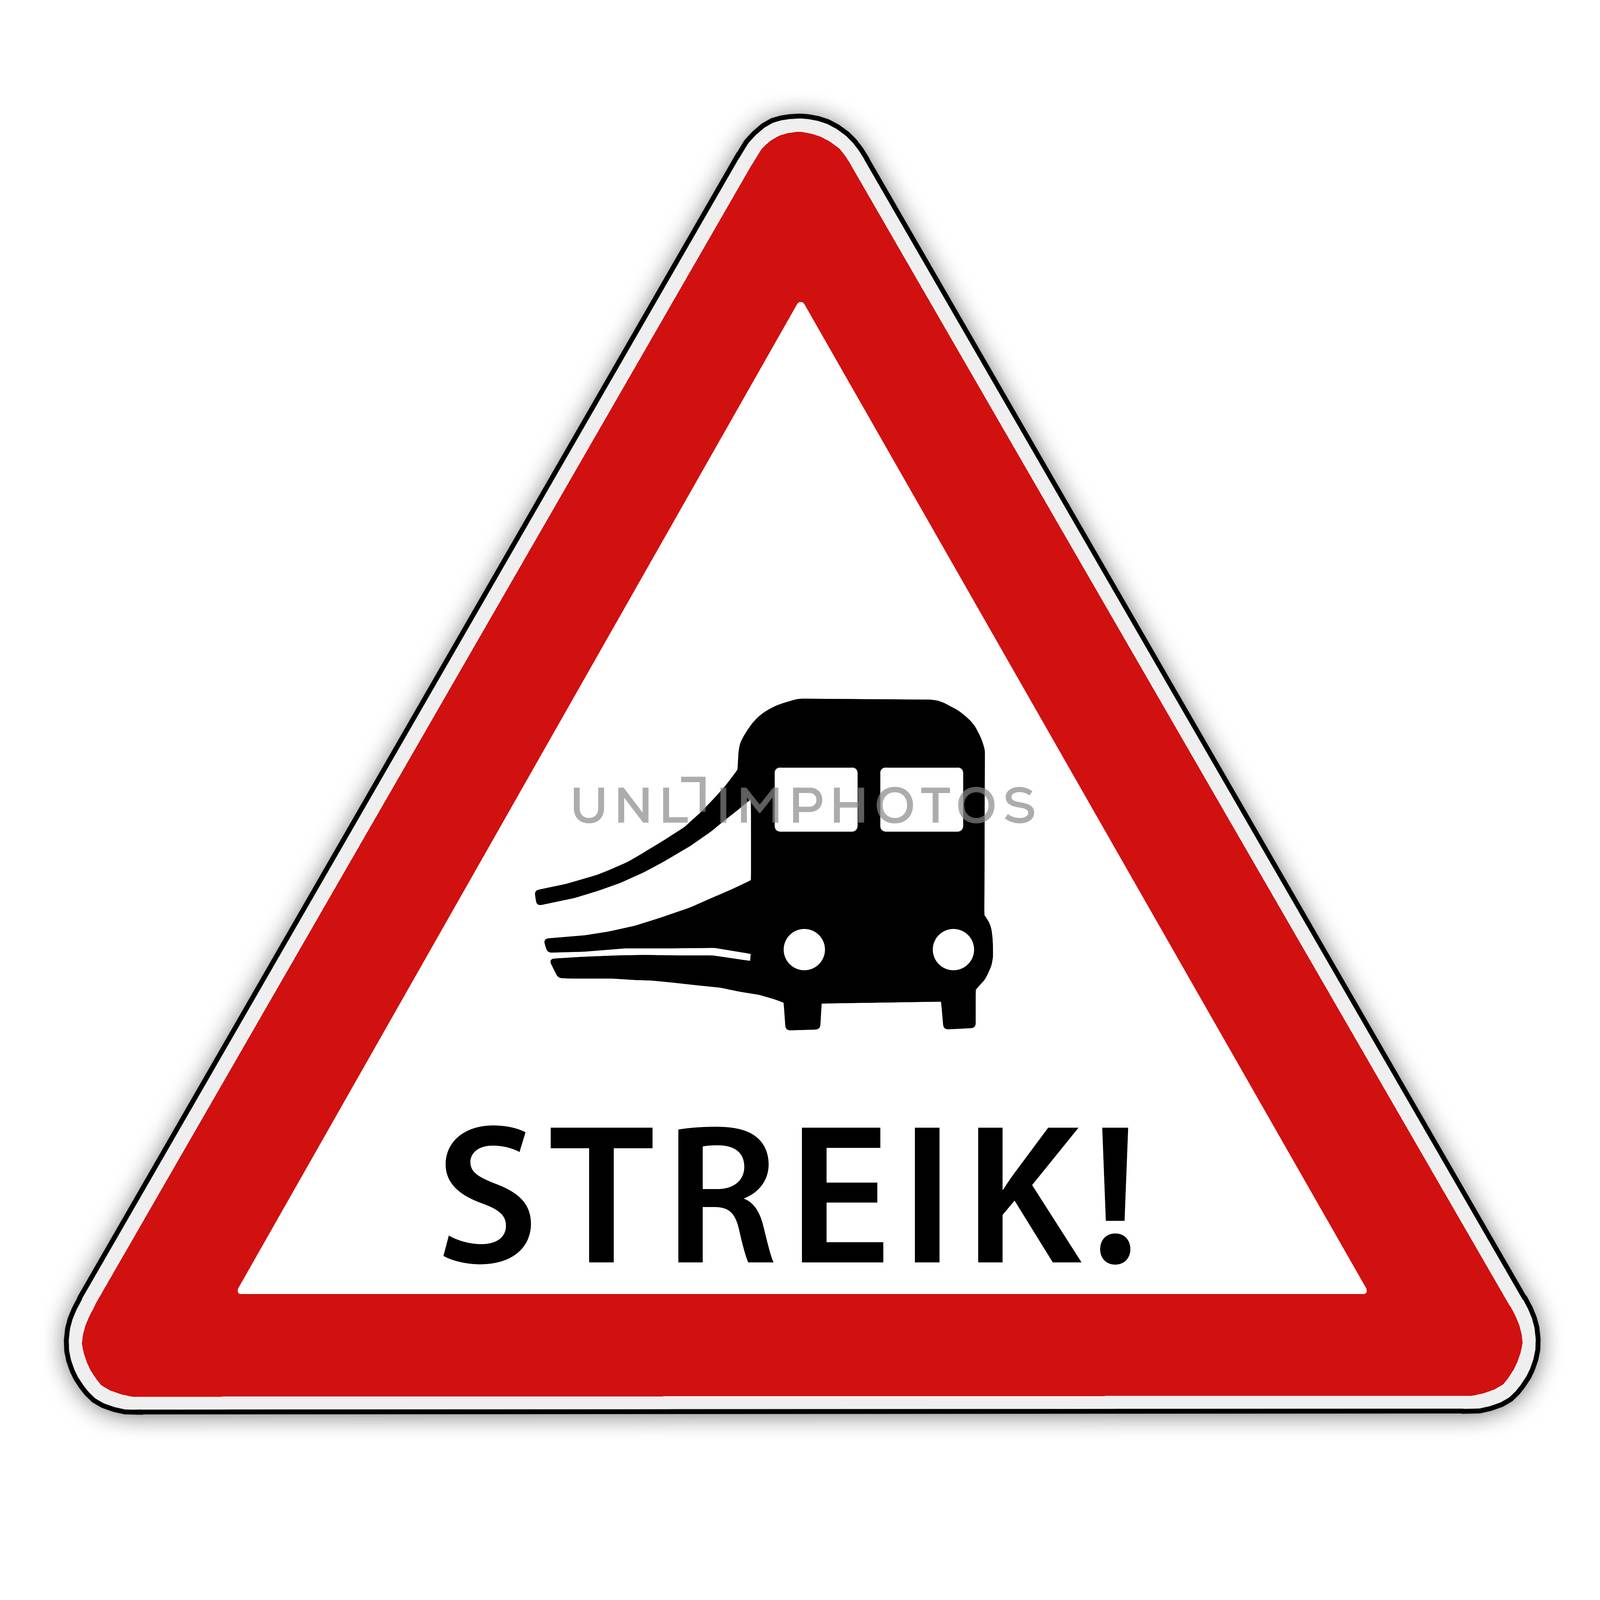 Isolated red / white traffic sign with train symbolic for rail strike - in german language